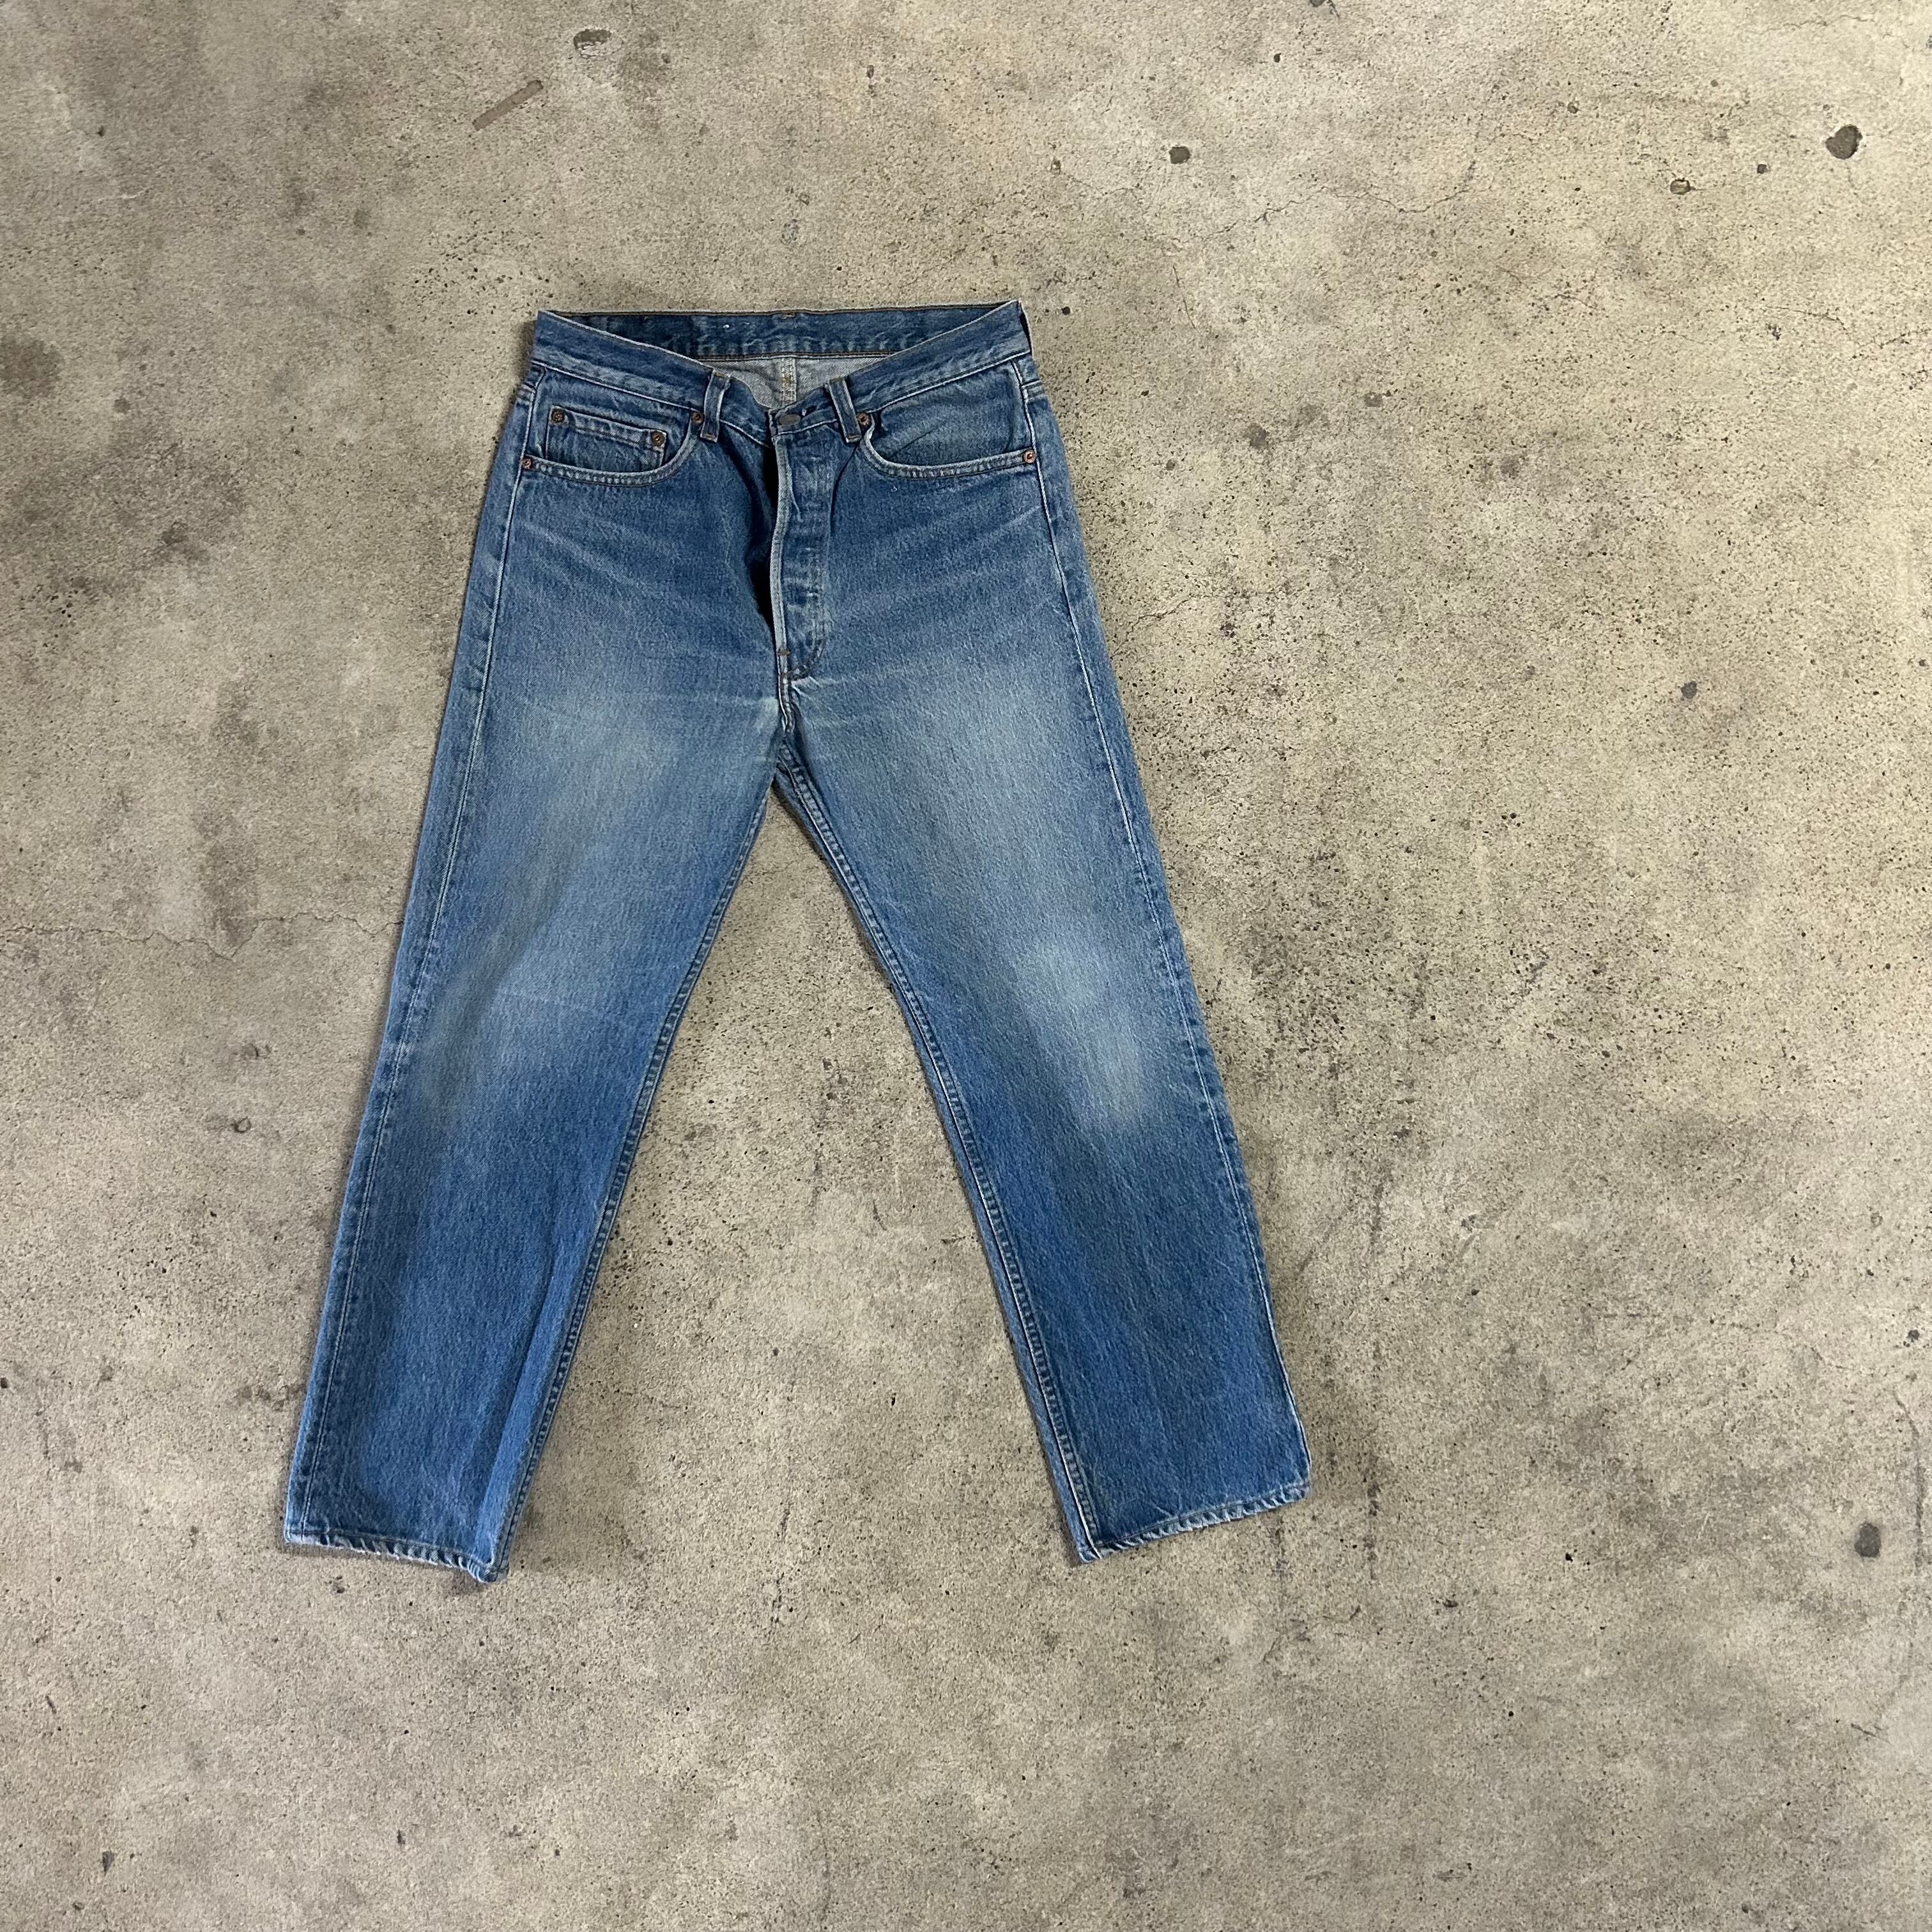 80s Levi’s 501 Made in USA リーバイス 501 アメリカ製 W33 ボタン裏524 ＃505128